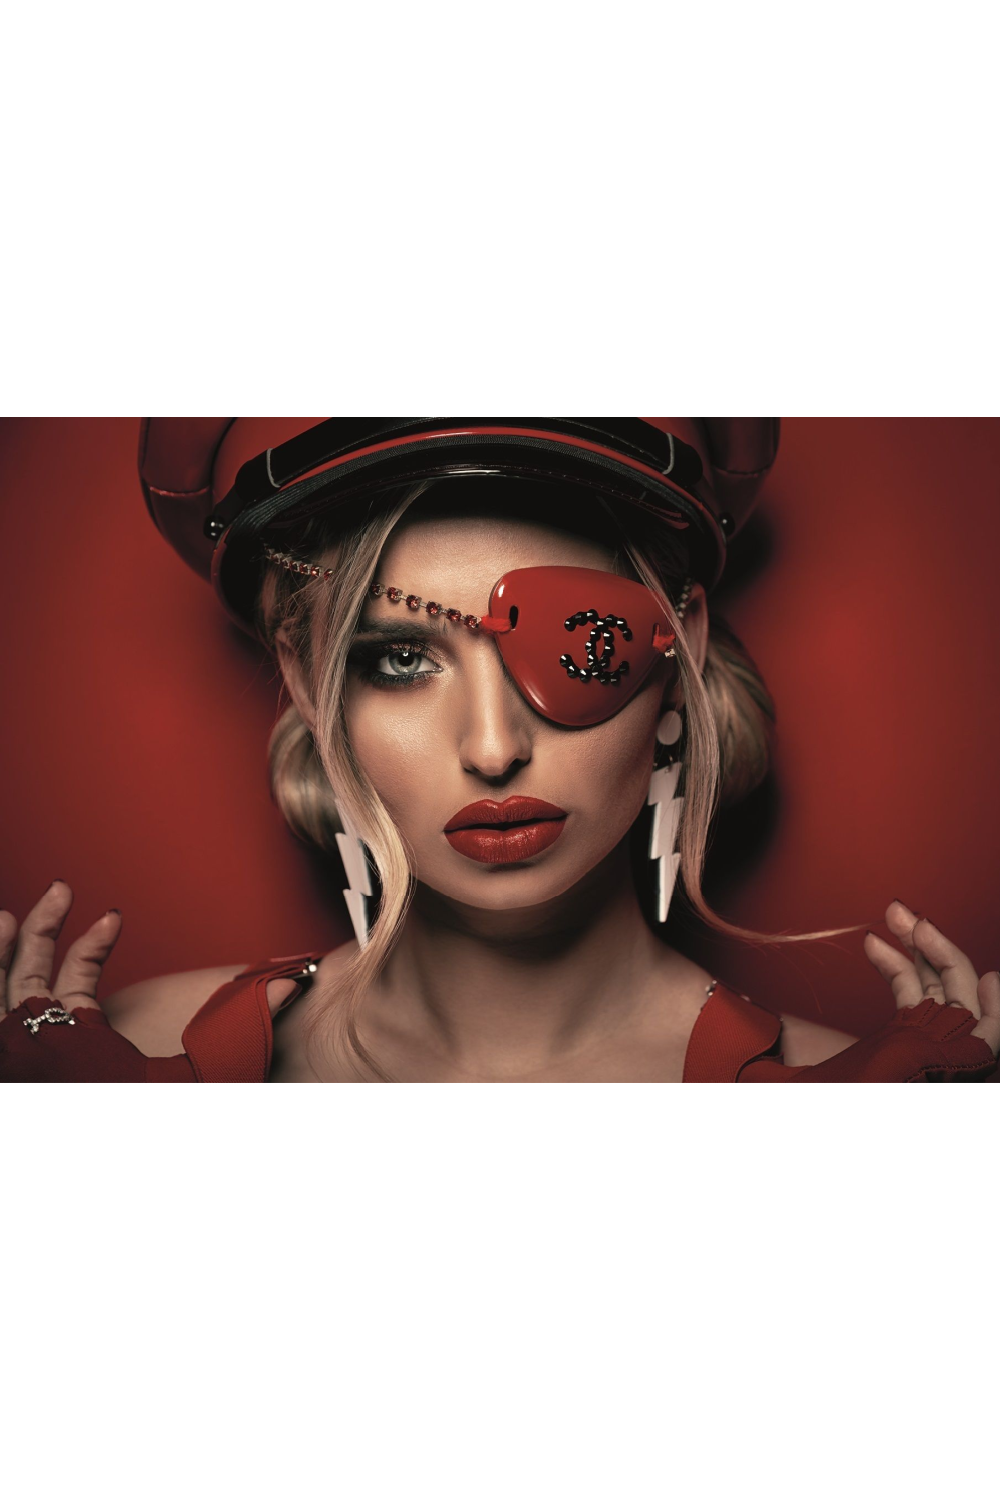 Modern Eyepatched Woman Portrait | Andrew Martin Chanel Lady In Red | Oroa.com